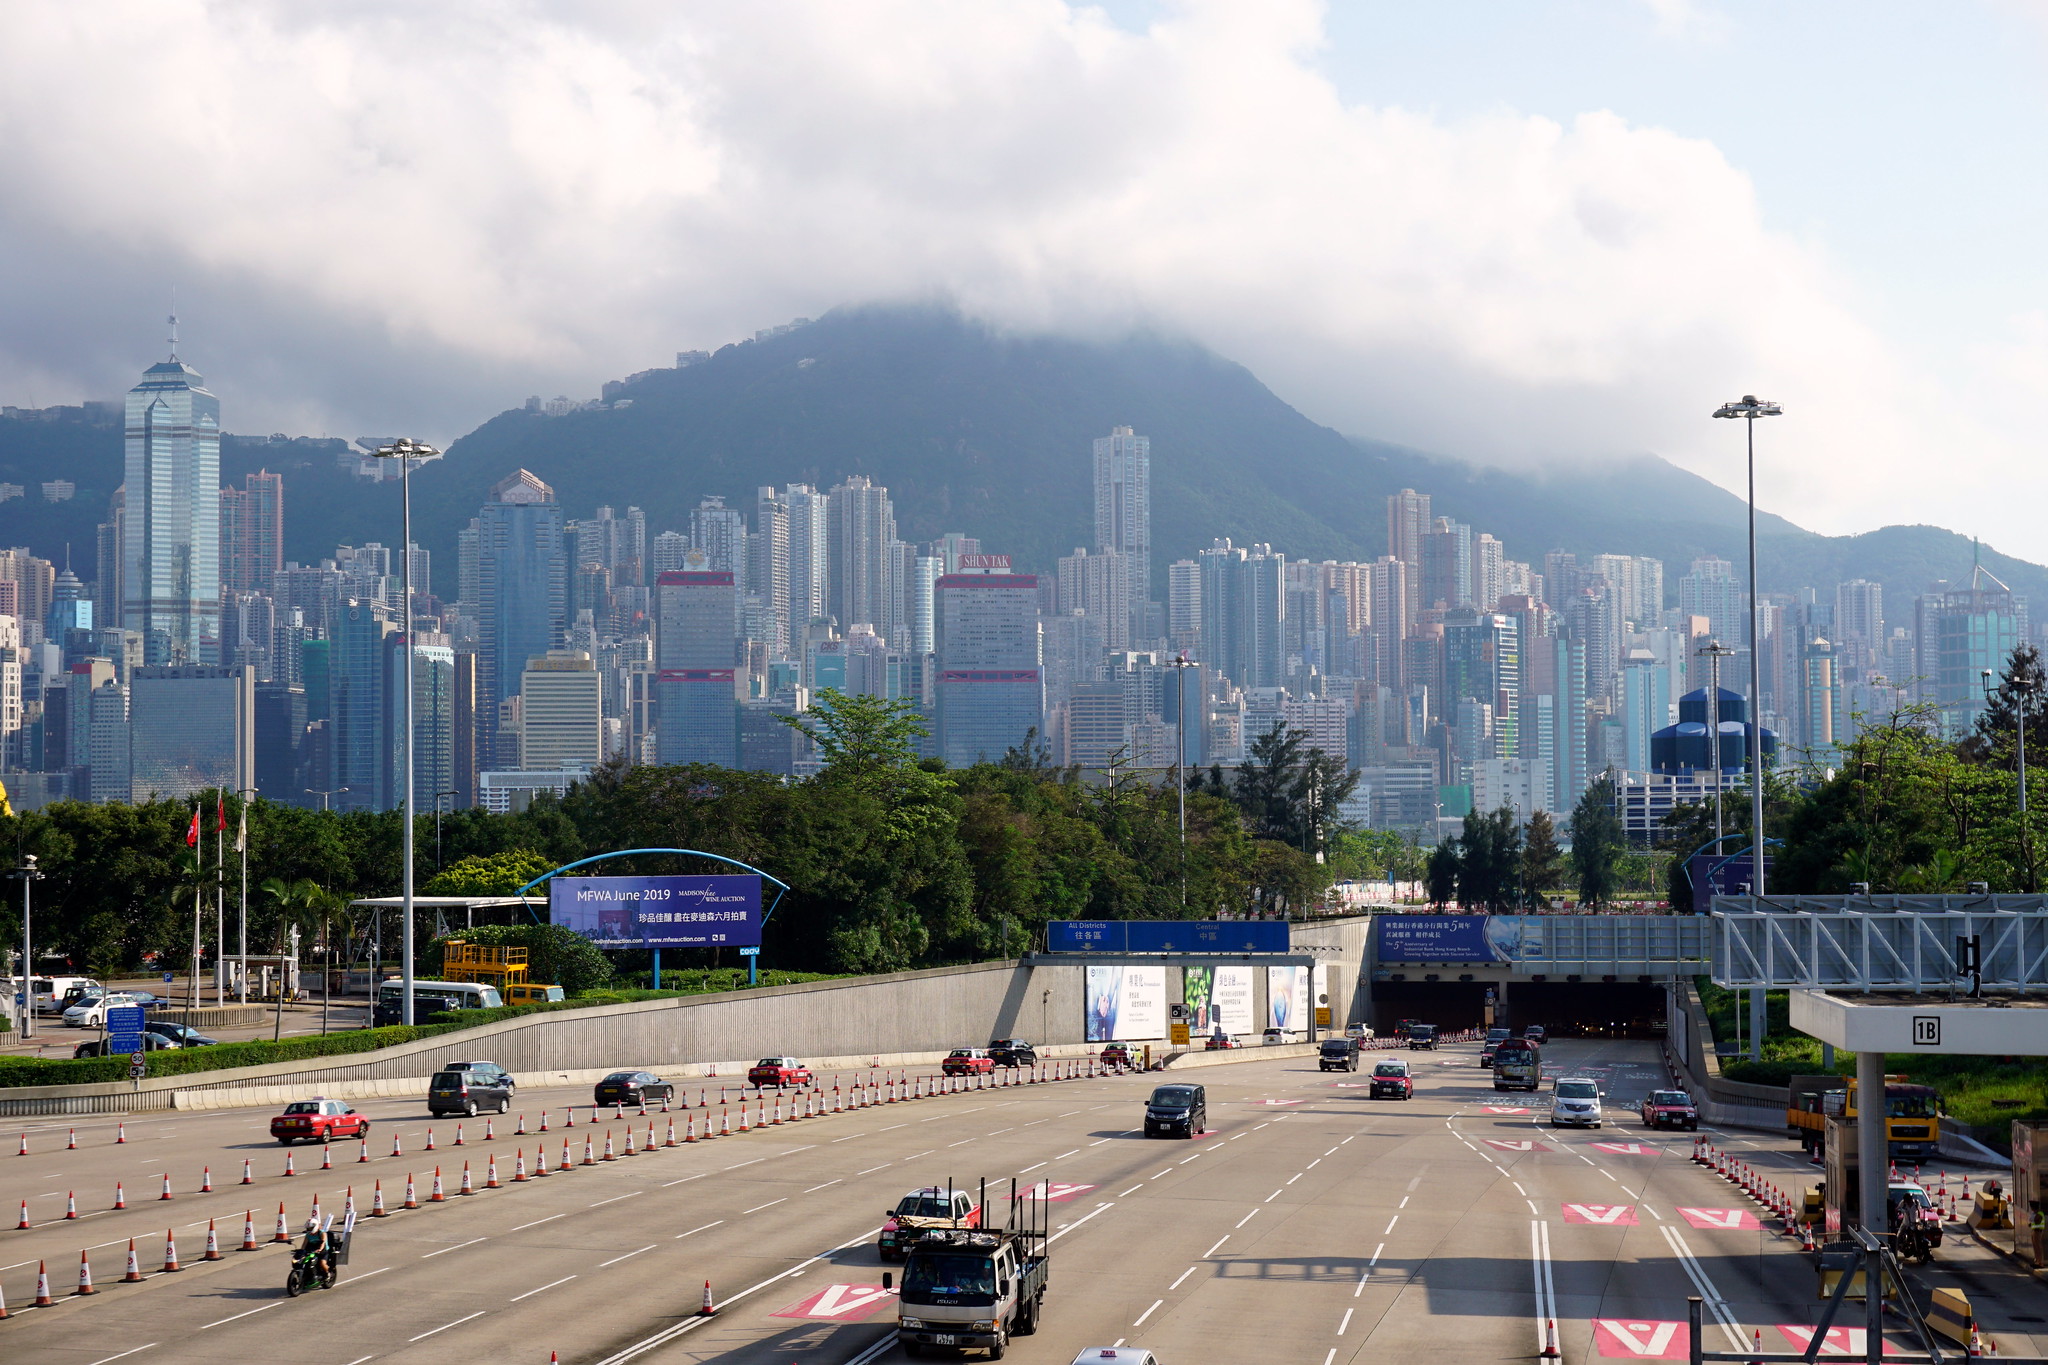 A view of the traffic entering and exiting at the Kowloon side of the Western Harbour Crossing in Hong Kong. There are red taxis, a minibus, private cars and a motocycle among the vehicles at the tunnel.